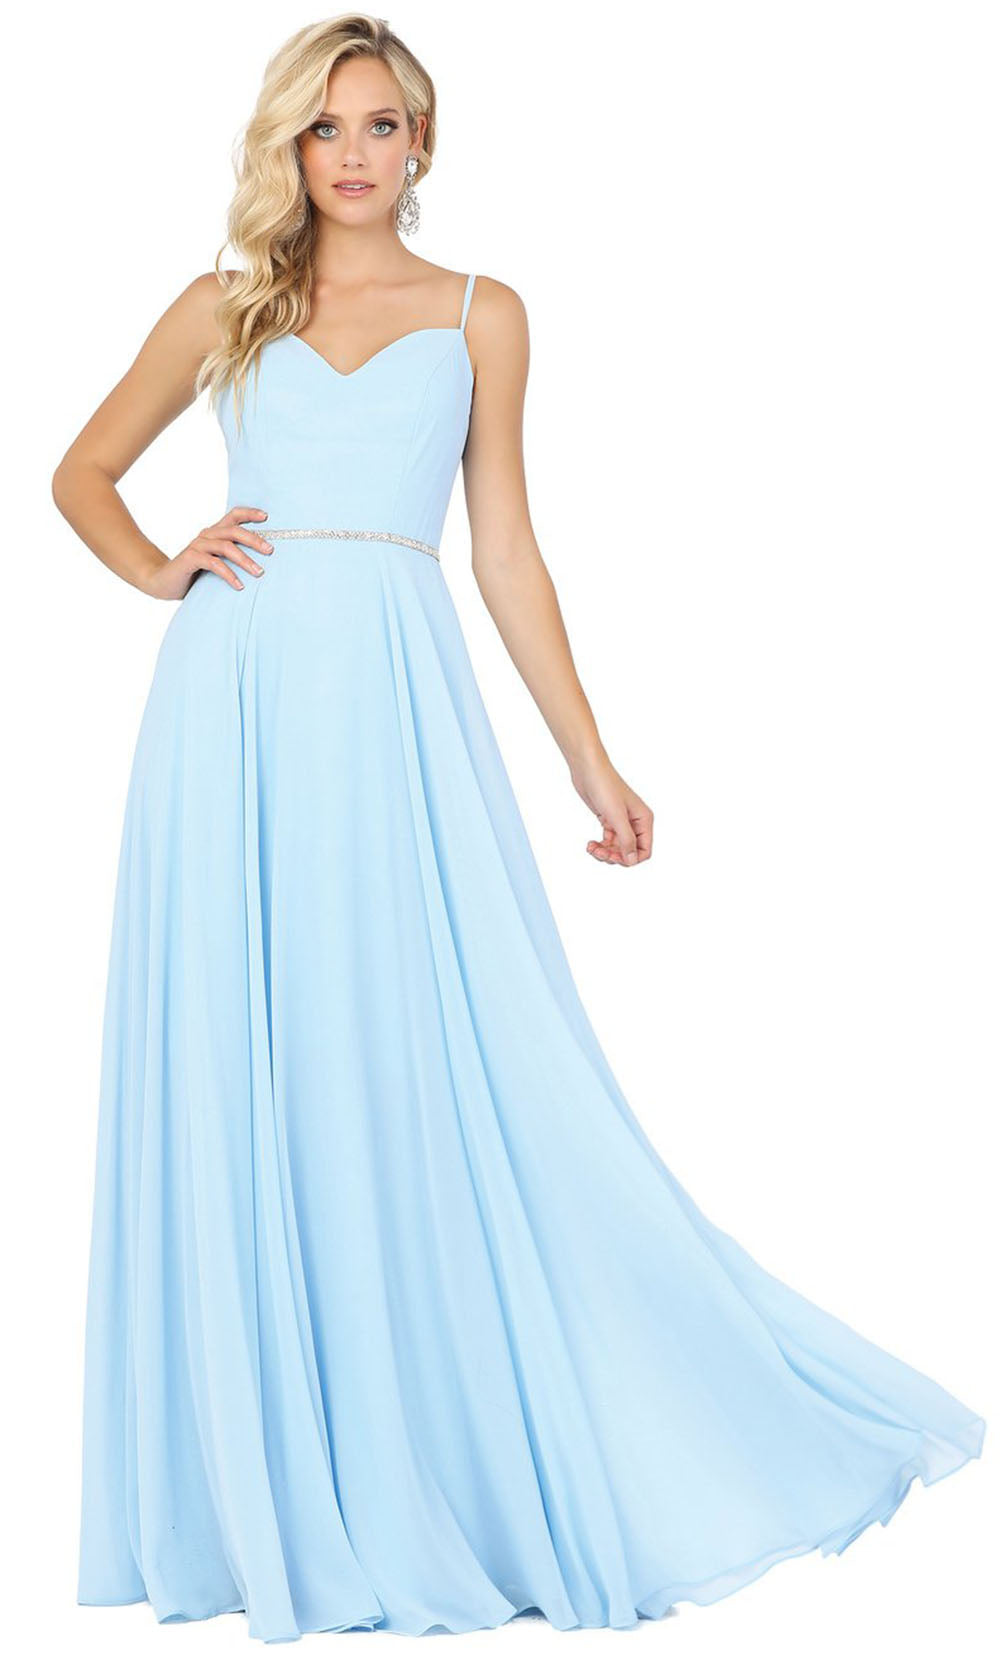 Dancing Queen - 4030 Sleeveless Sweetheart Neck Flowy A-Line Gown In Blue